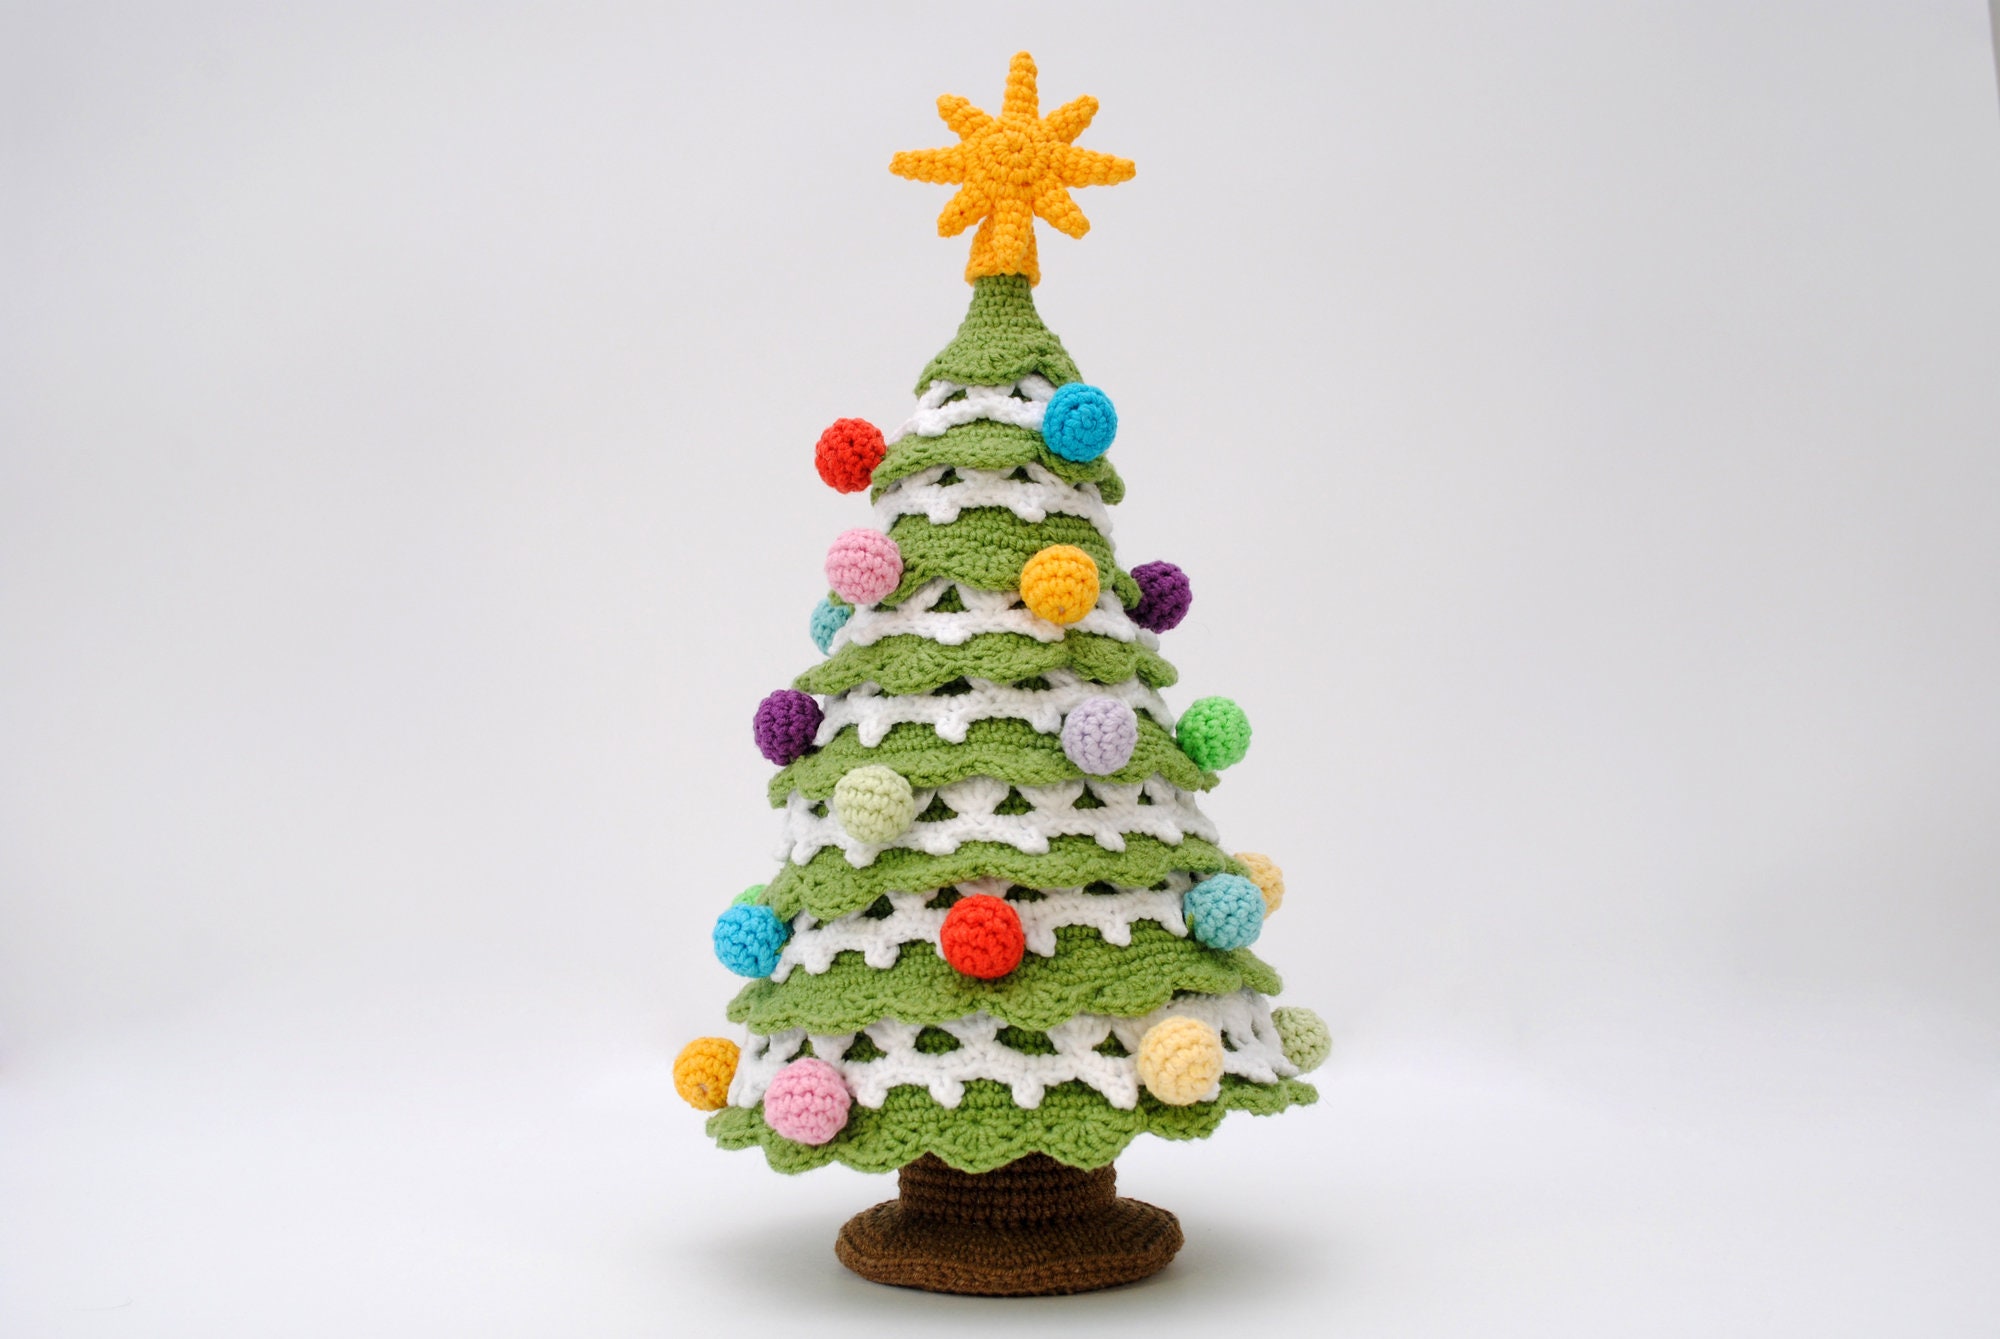 Diy Crochet Toy Kits Christmas Tree Learn To Do It Your Self Beginners –  PLUSH SHOP